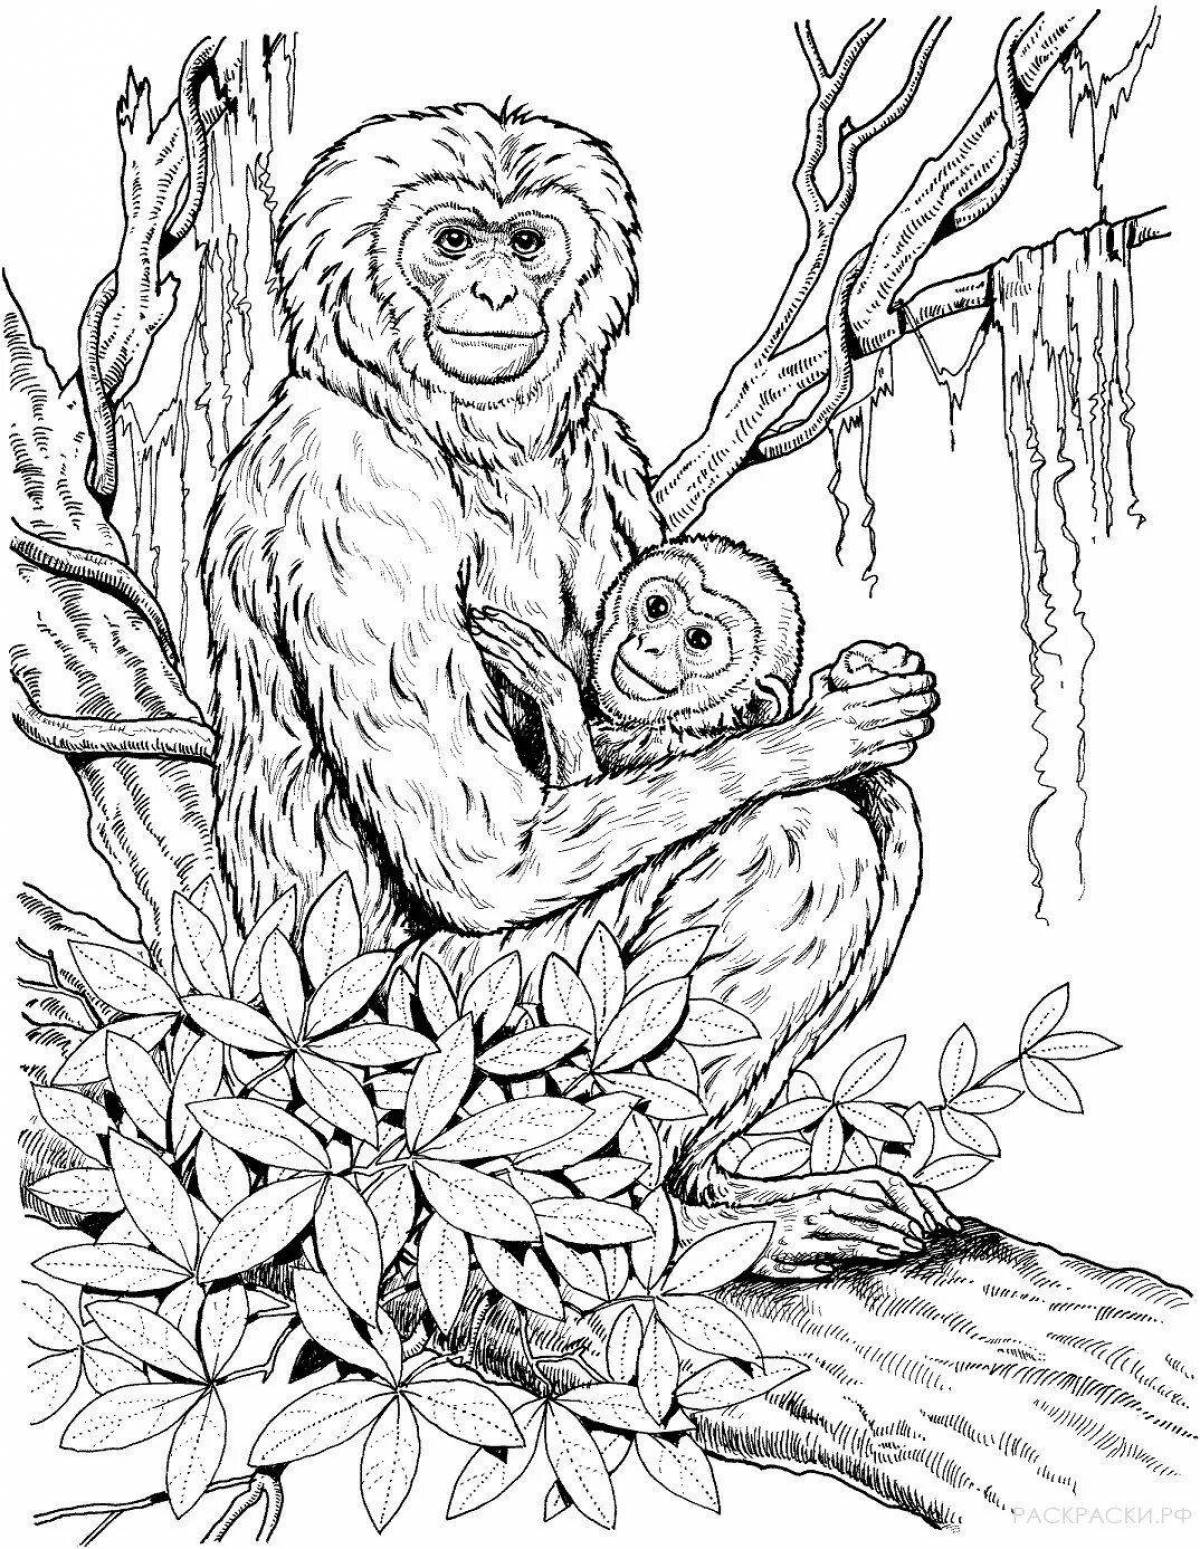 Joyful chimpanzee coloring pages for kids